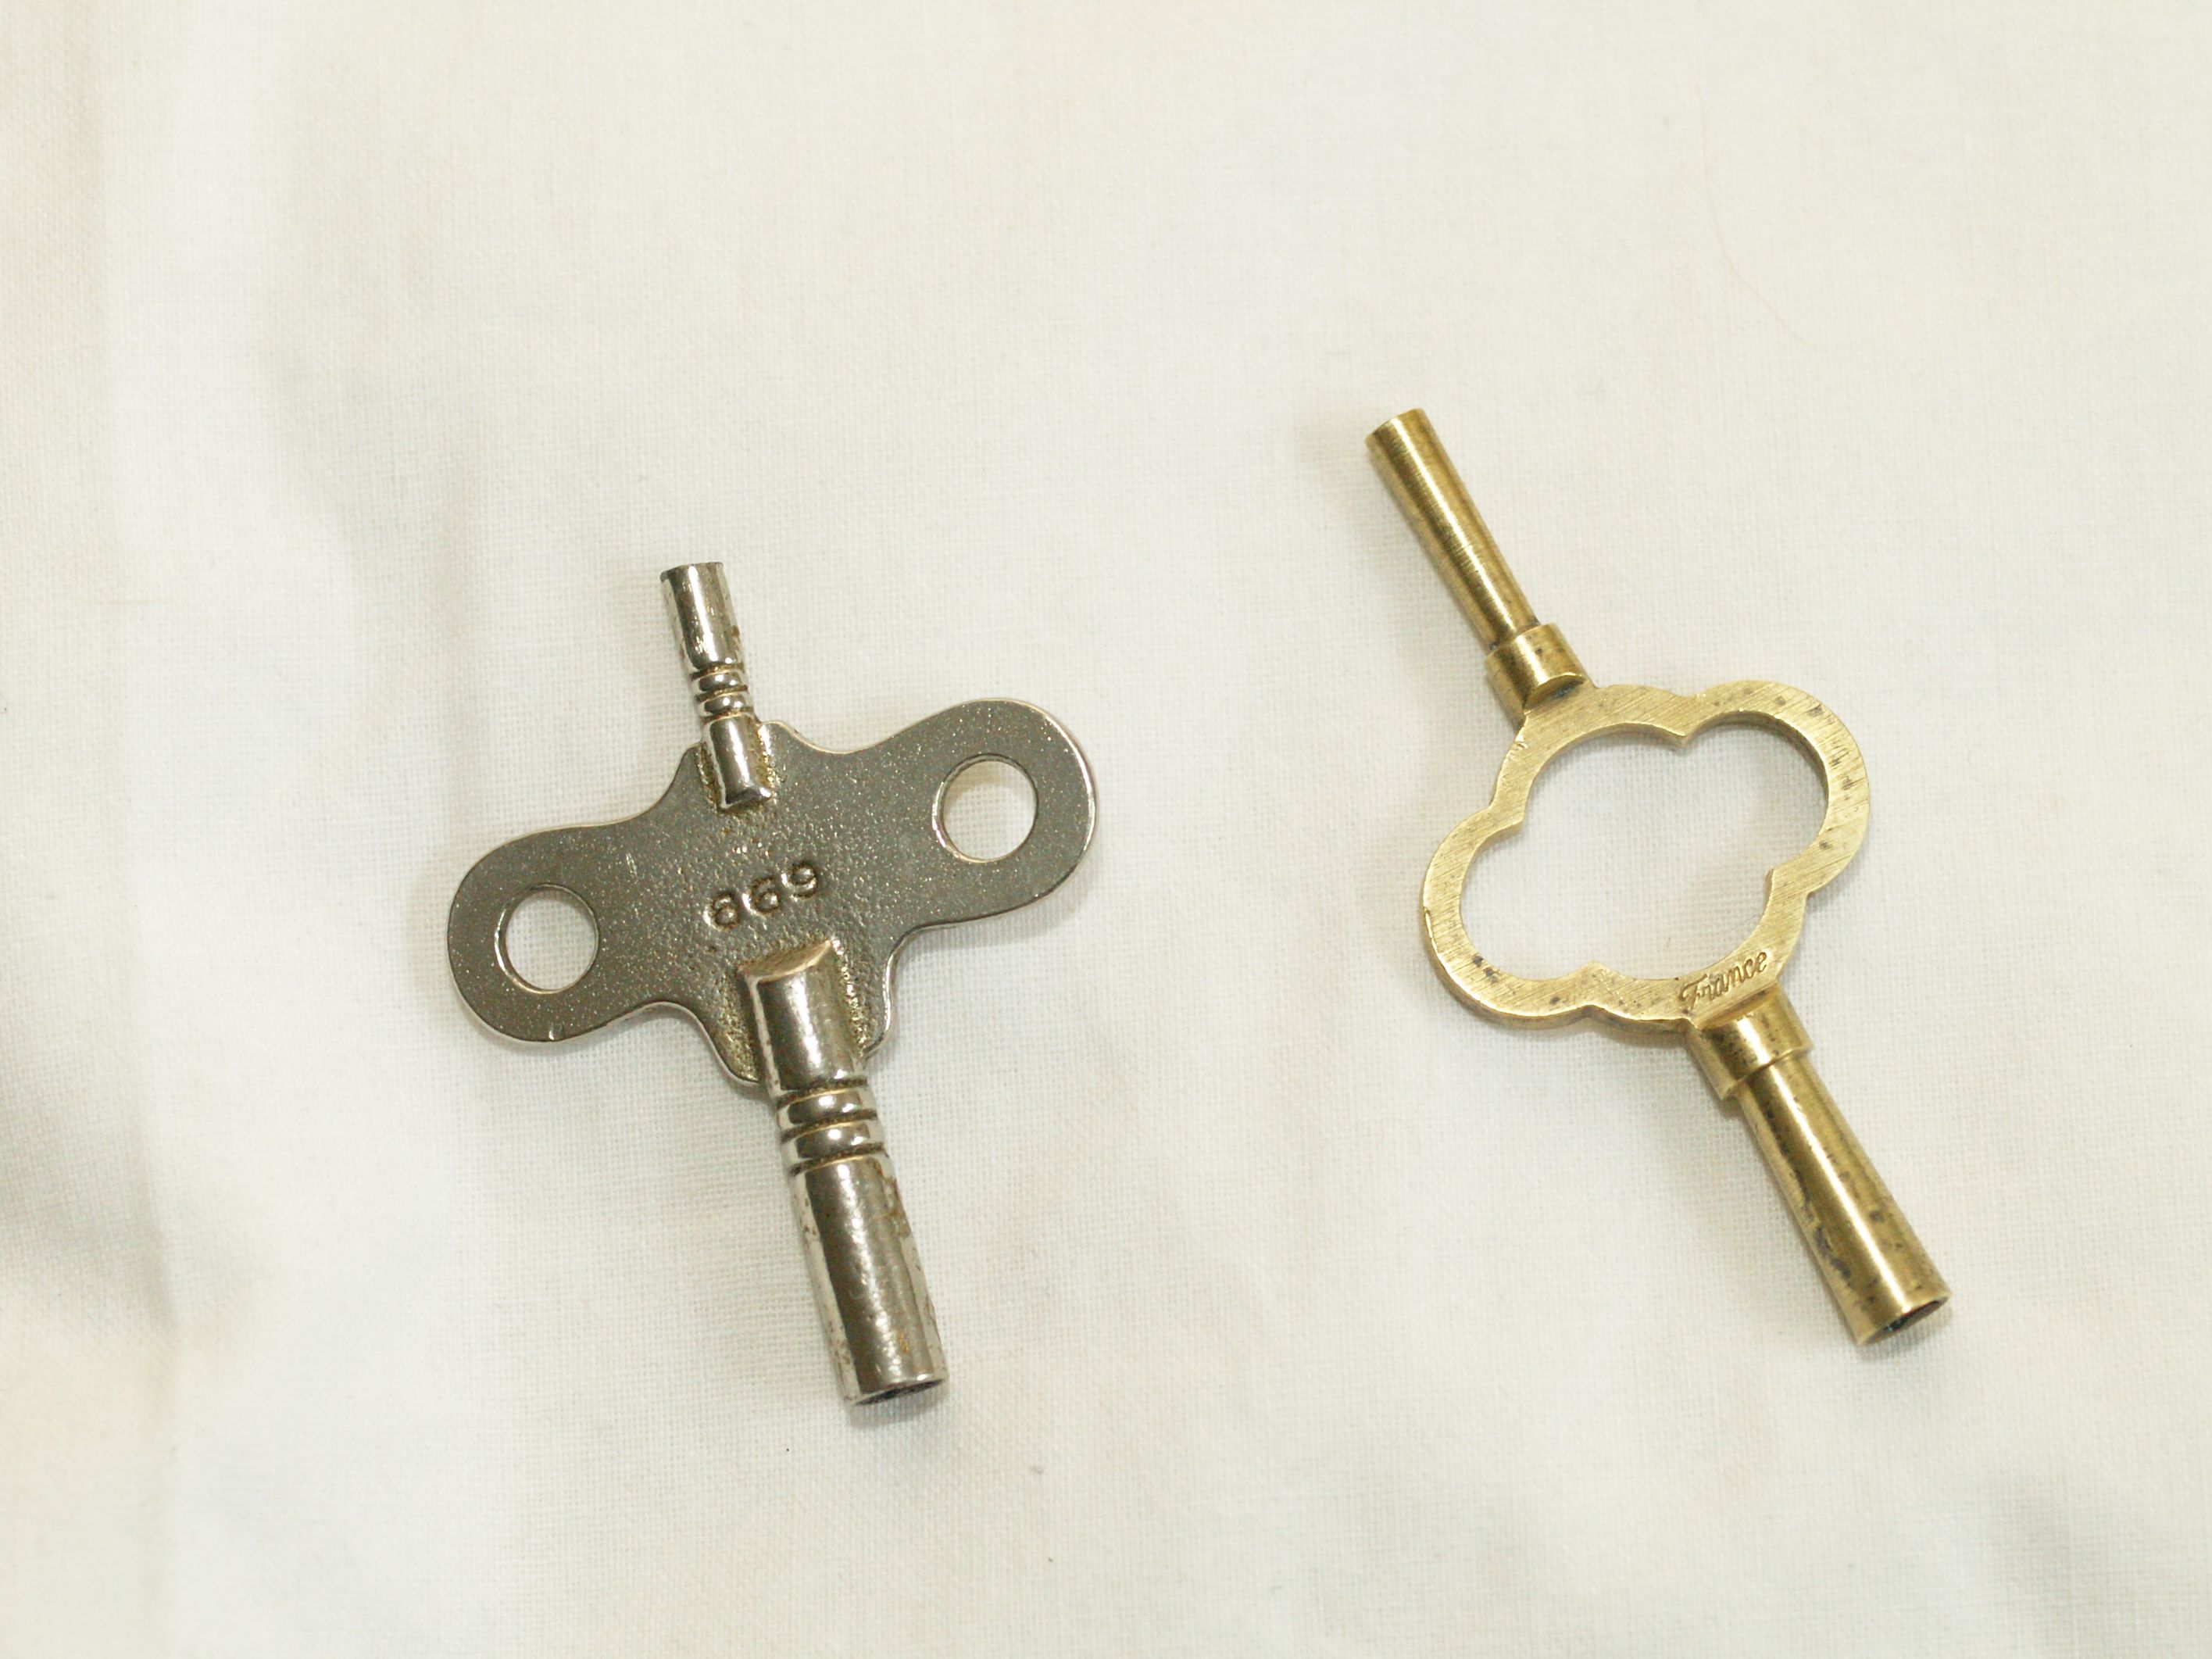 WALL CLOCK TRAVEL CLOCK KEY DOUBLE END SIZE 2 KEY 2.75 MM  SMALL END 1.75 MM 